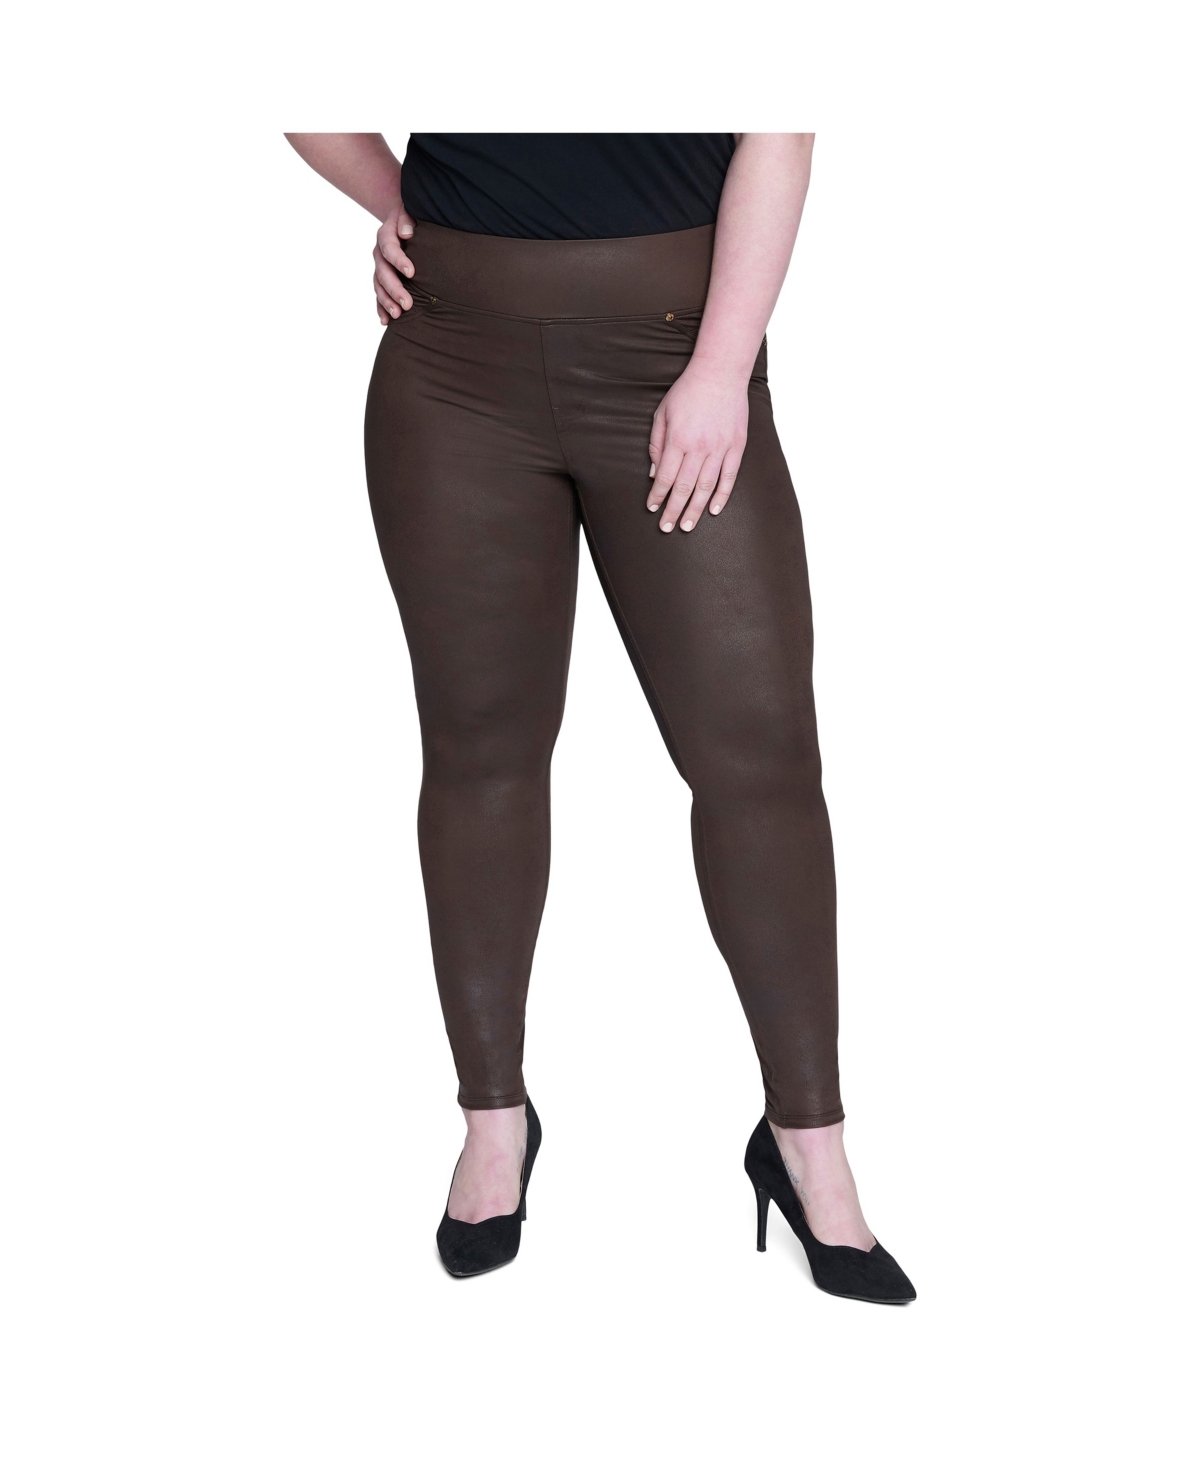 Jeans Plus Size Tummy Toner Pull-on Coated Ponte Pants - Espresso Coated Dark Brown